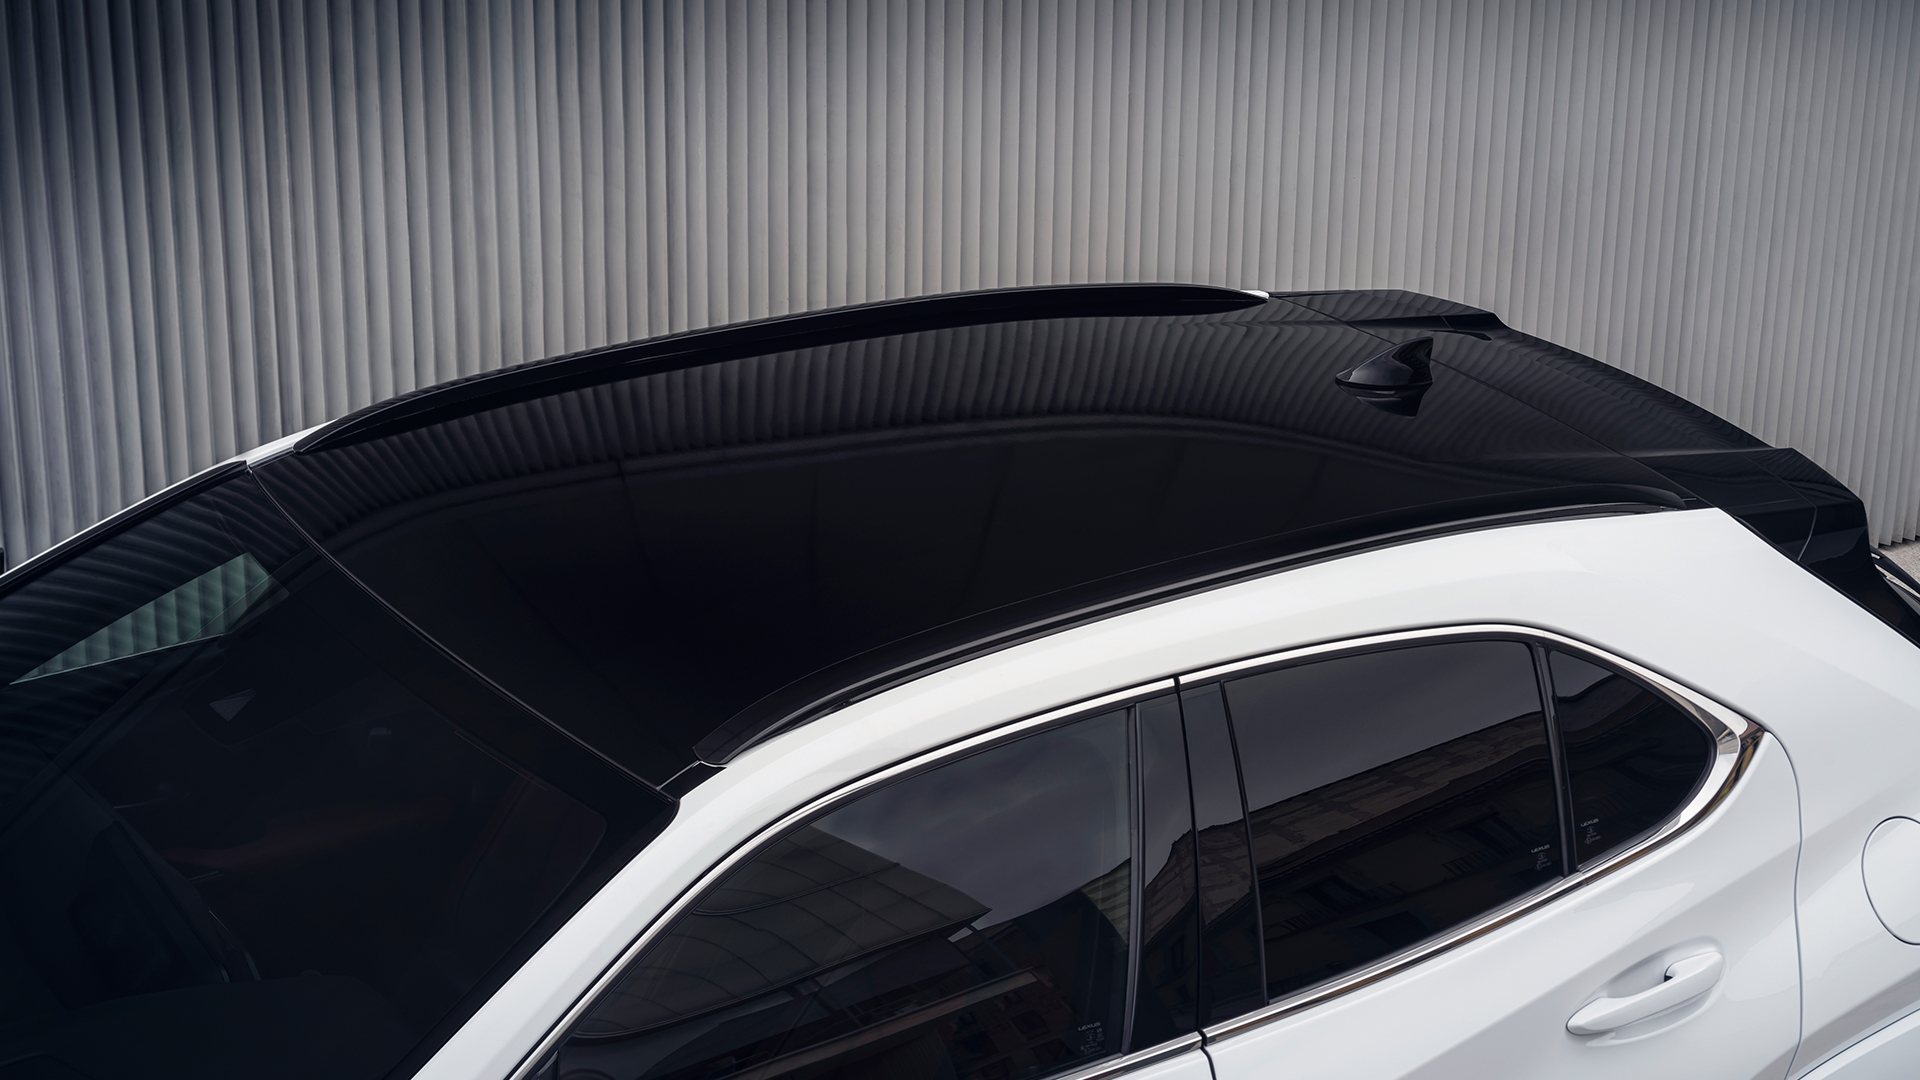 The roof of the Lexus UX